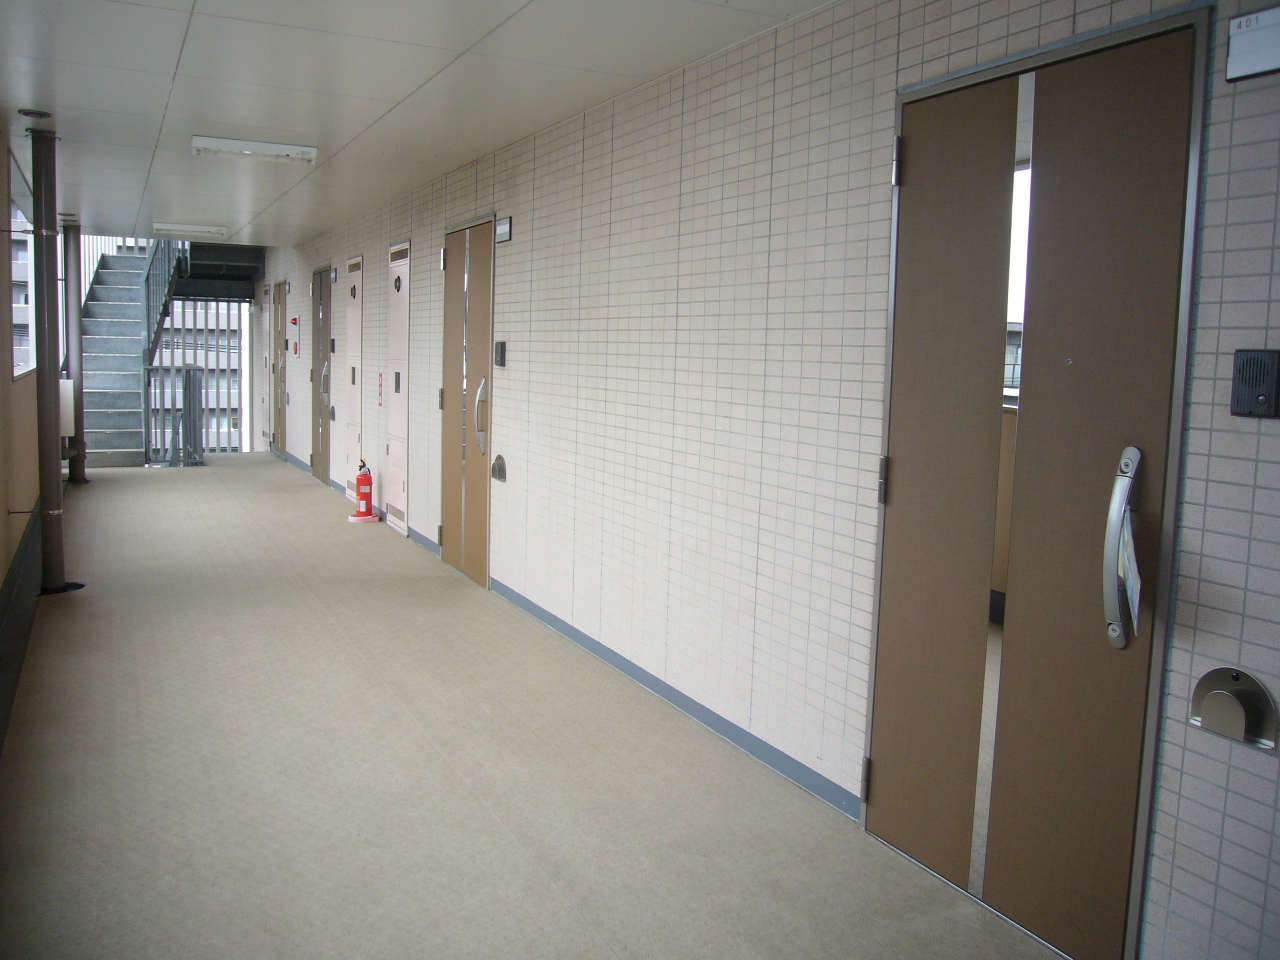 Other common areas. Spacious shared hallway